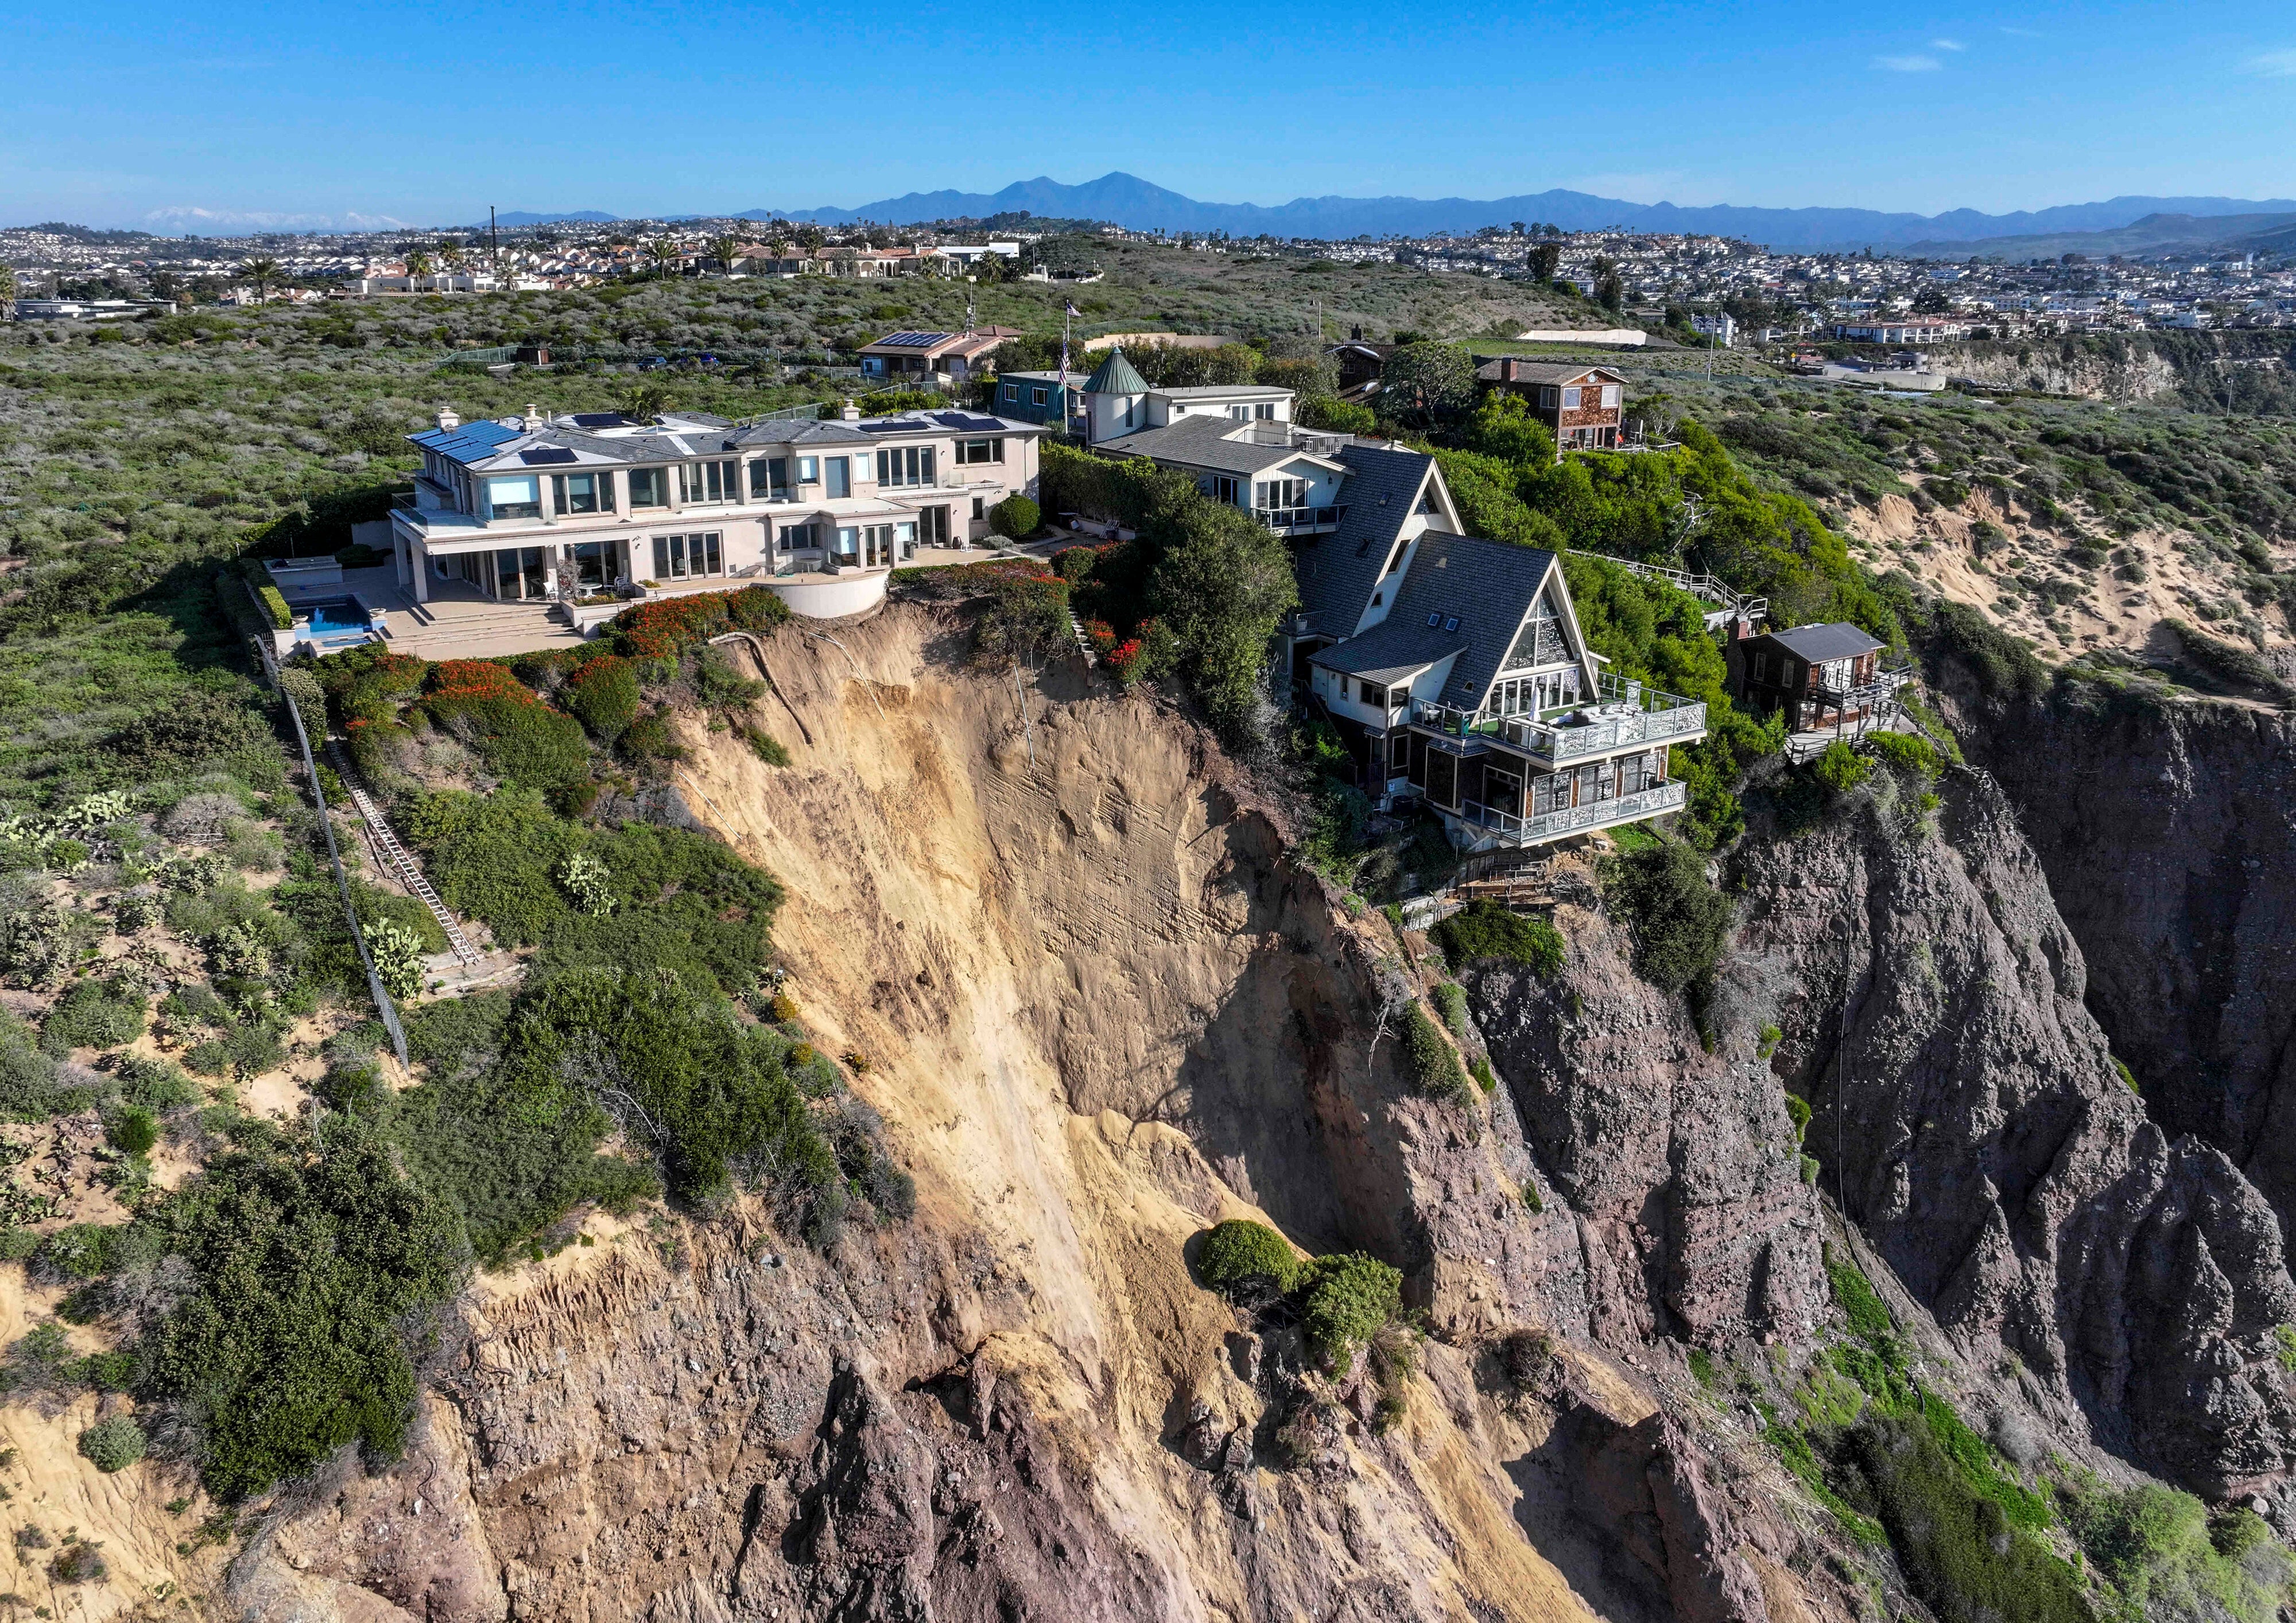 The mansion on the edge of a cliff